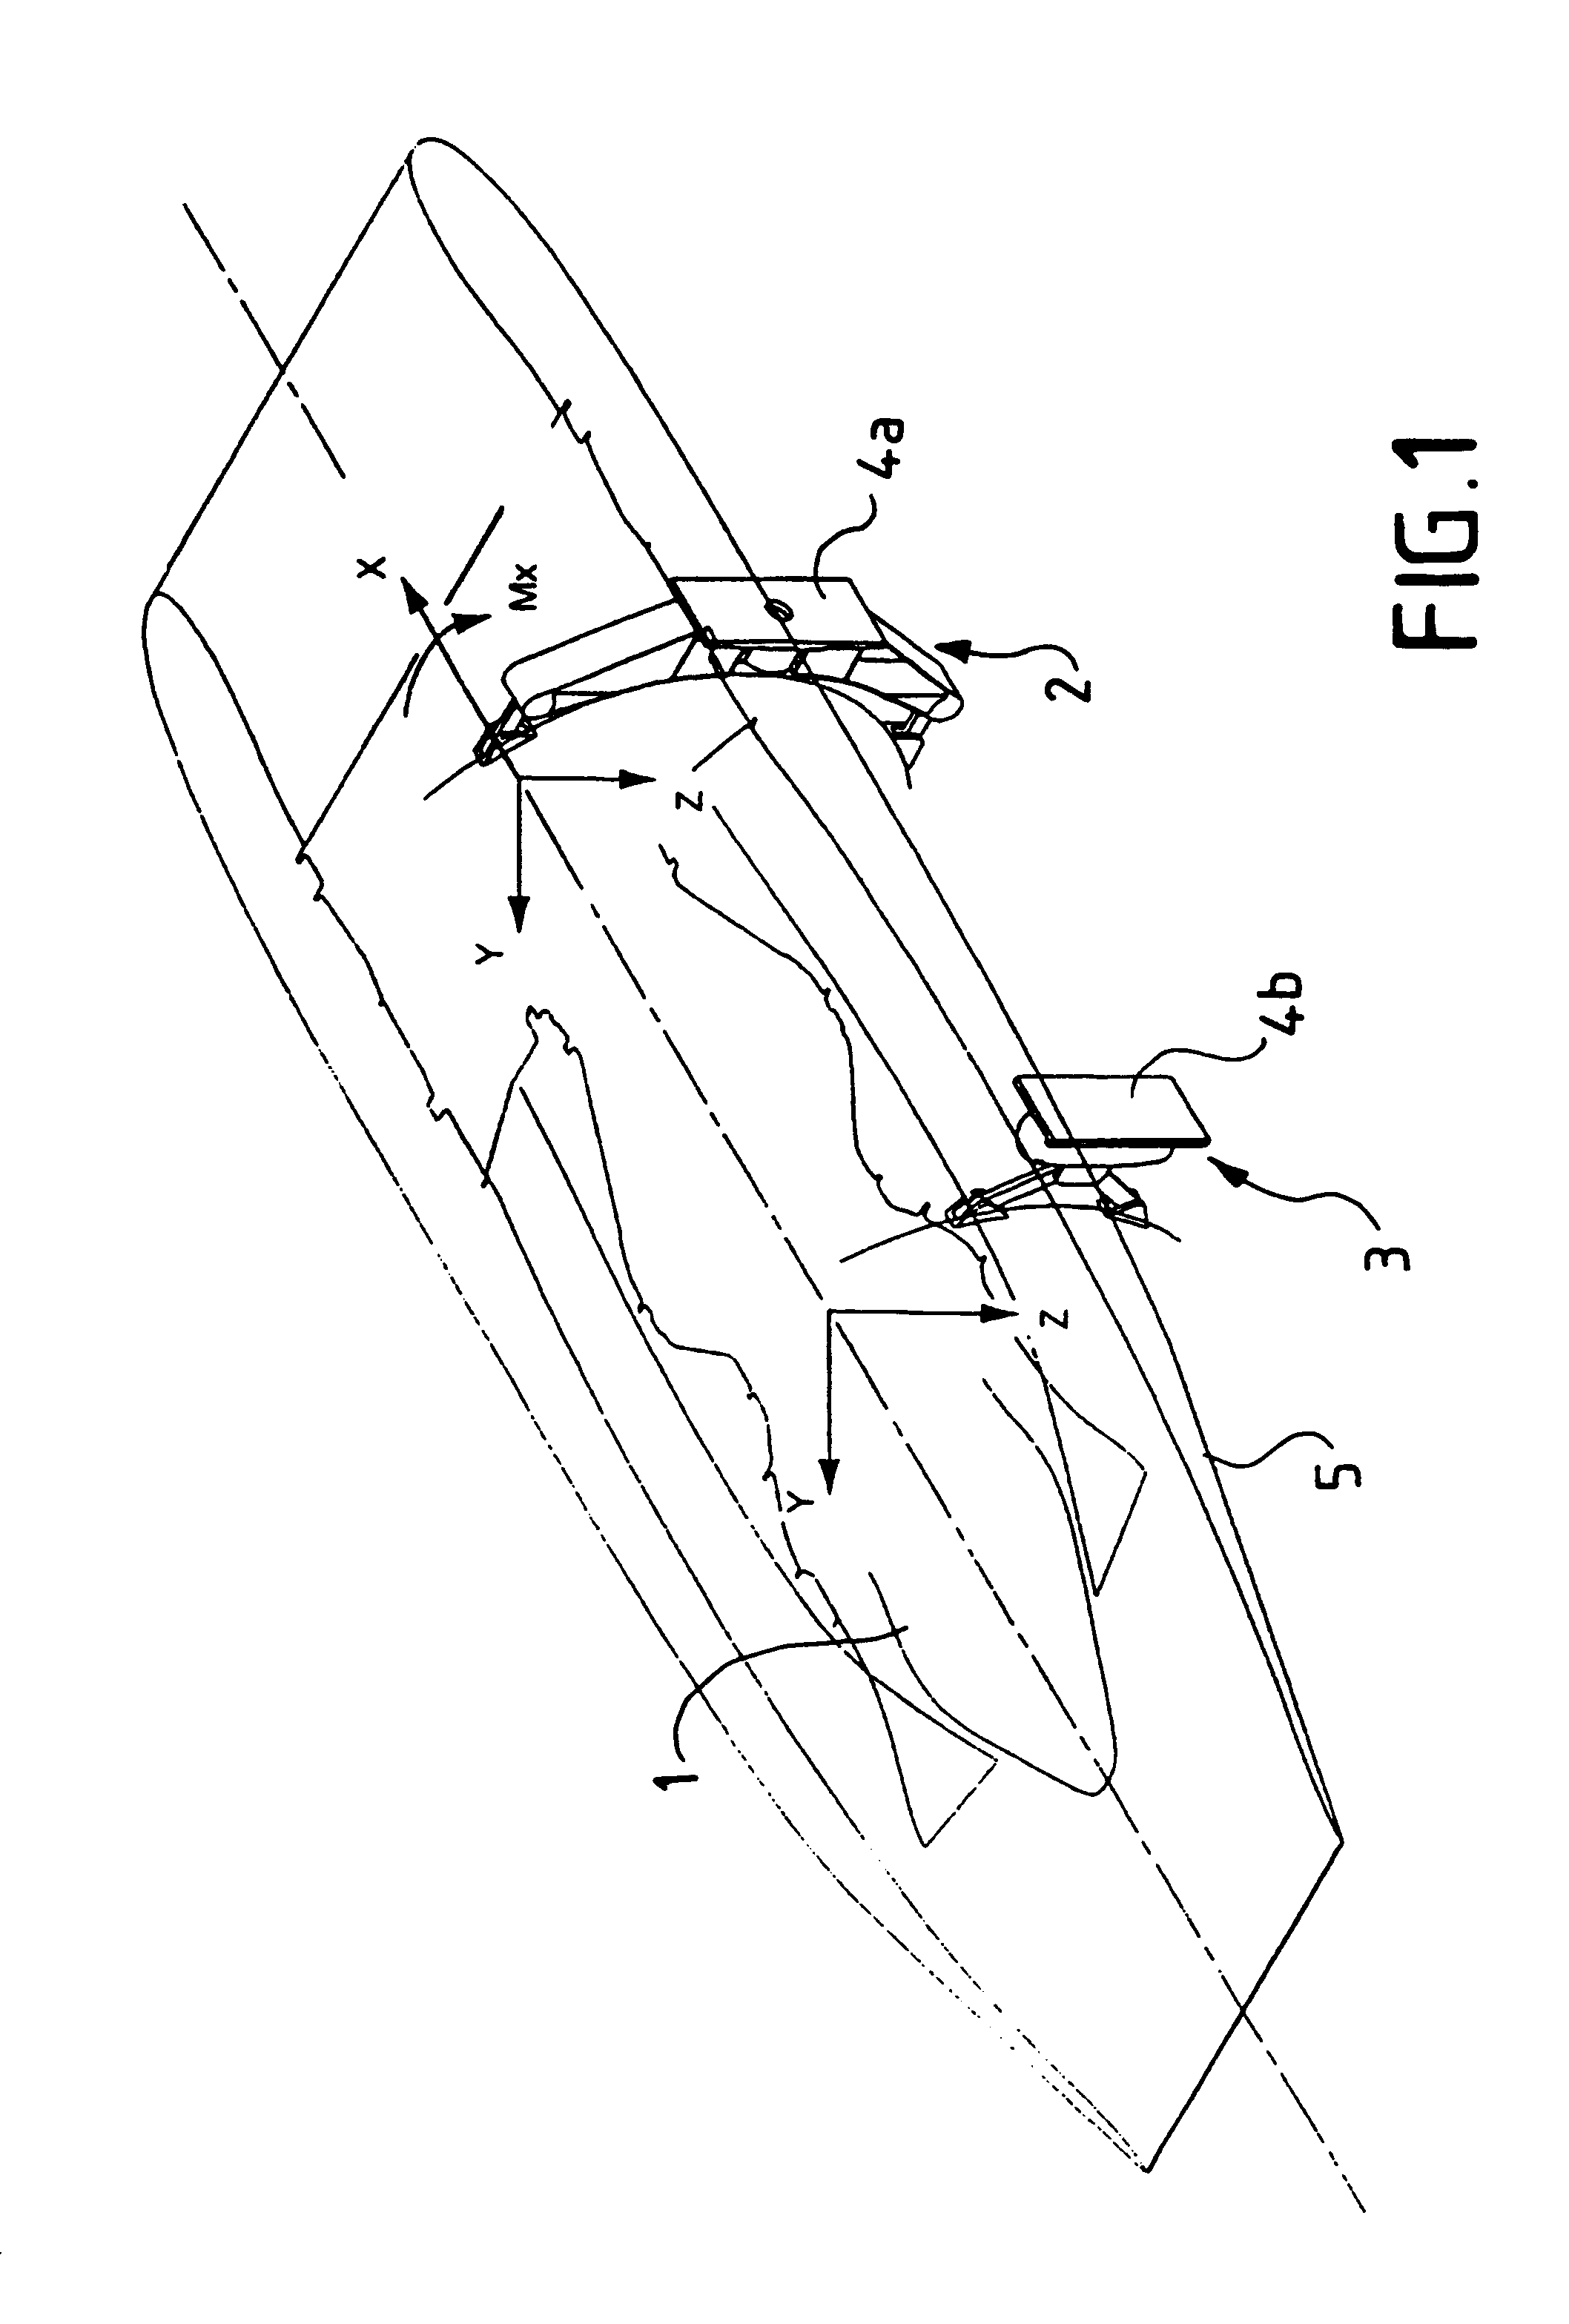 Suspension system with intrinsic safety features for aircraft powerplants